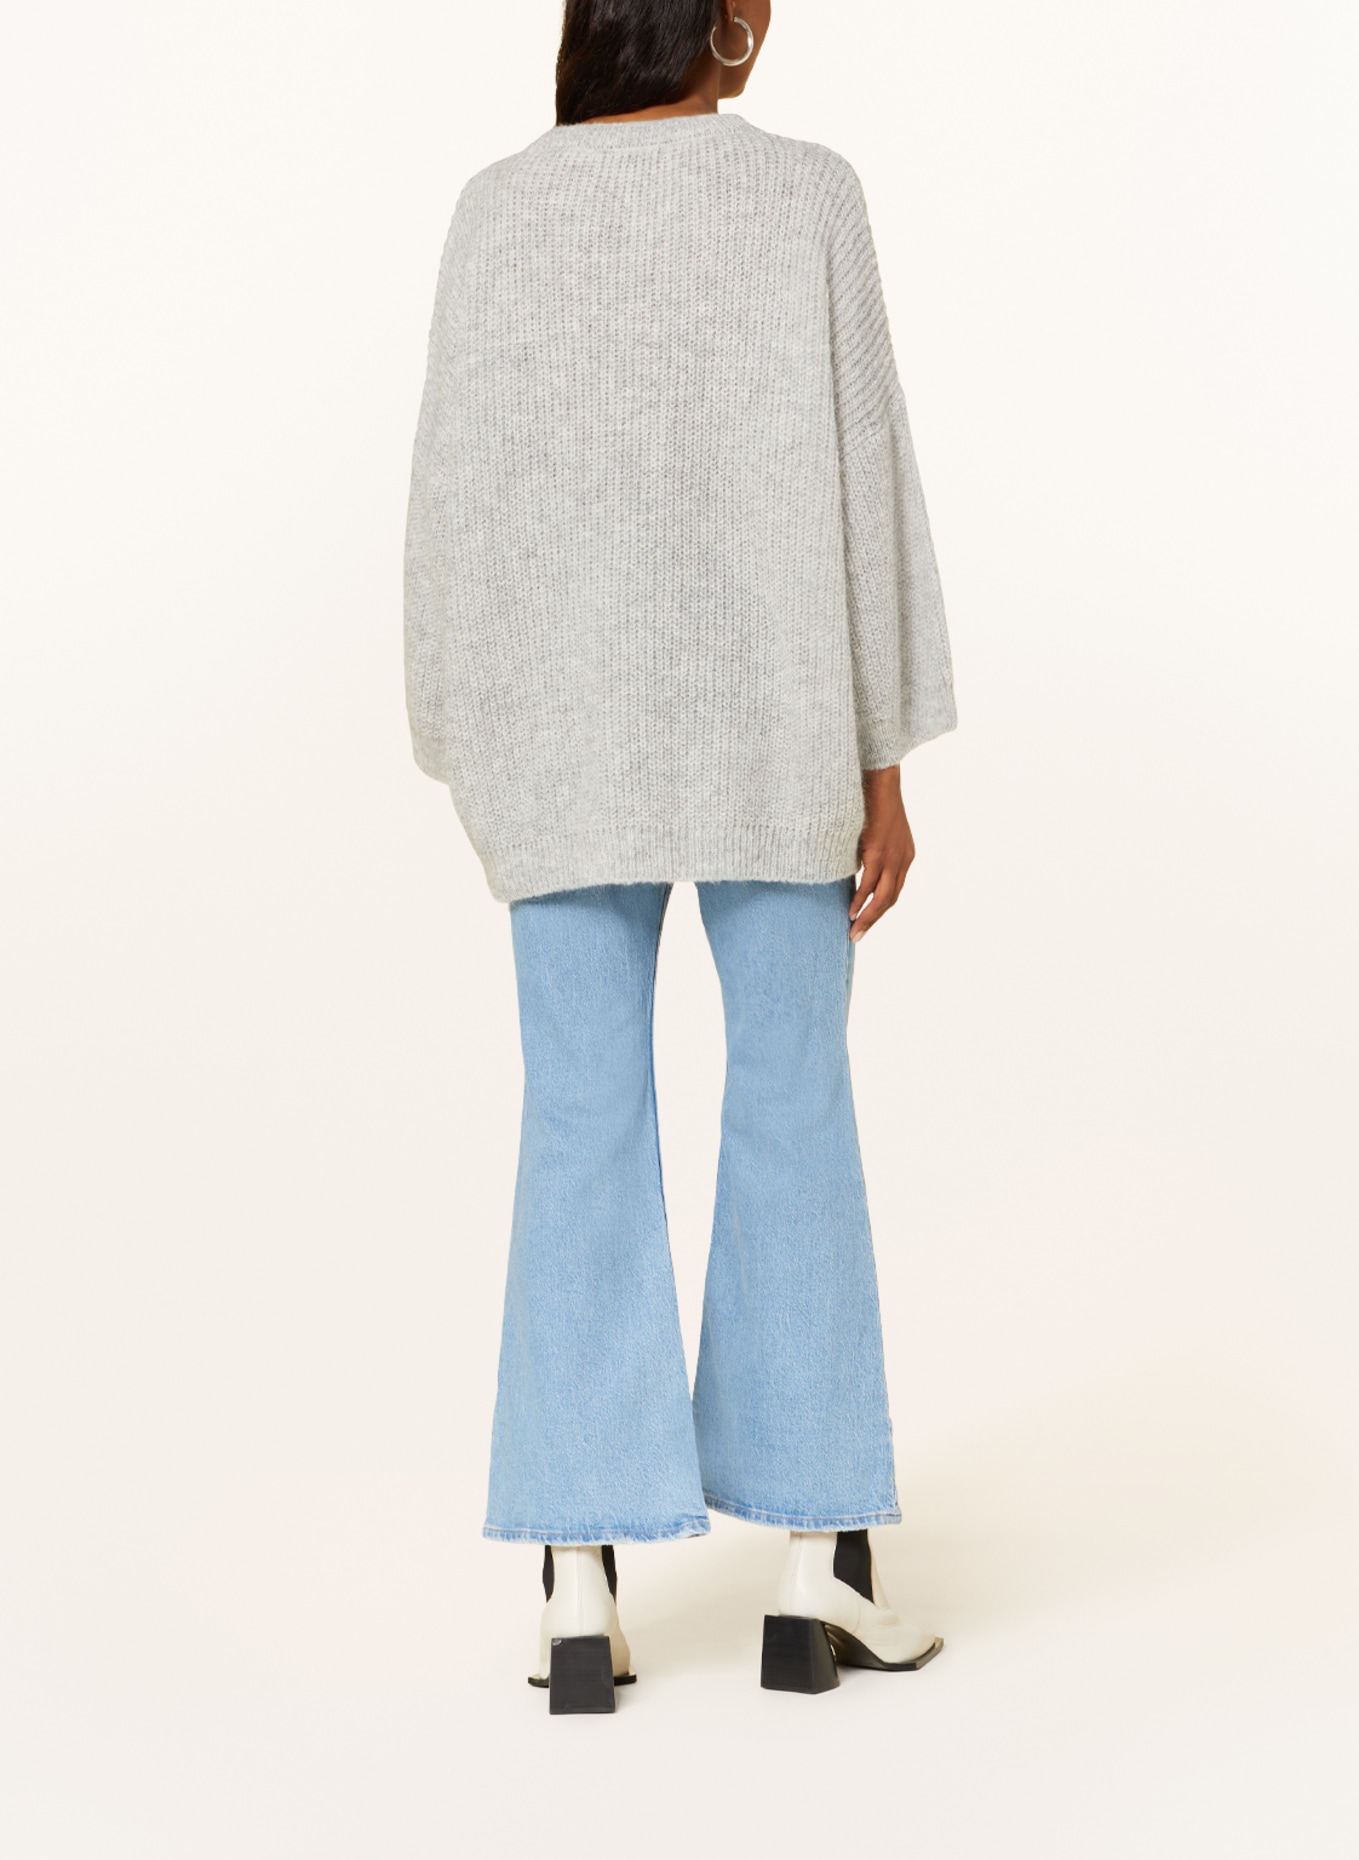 summum woman Sweater with mohair and 3/4 sleeves, Color: LIGHT GRAY (Image 3)